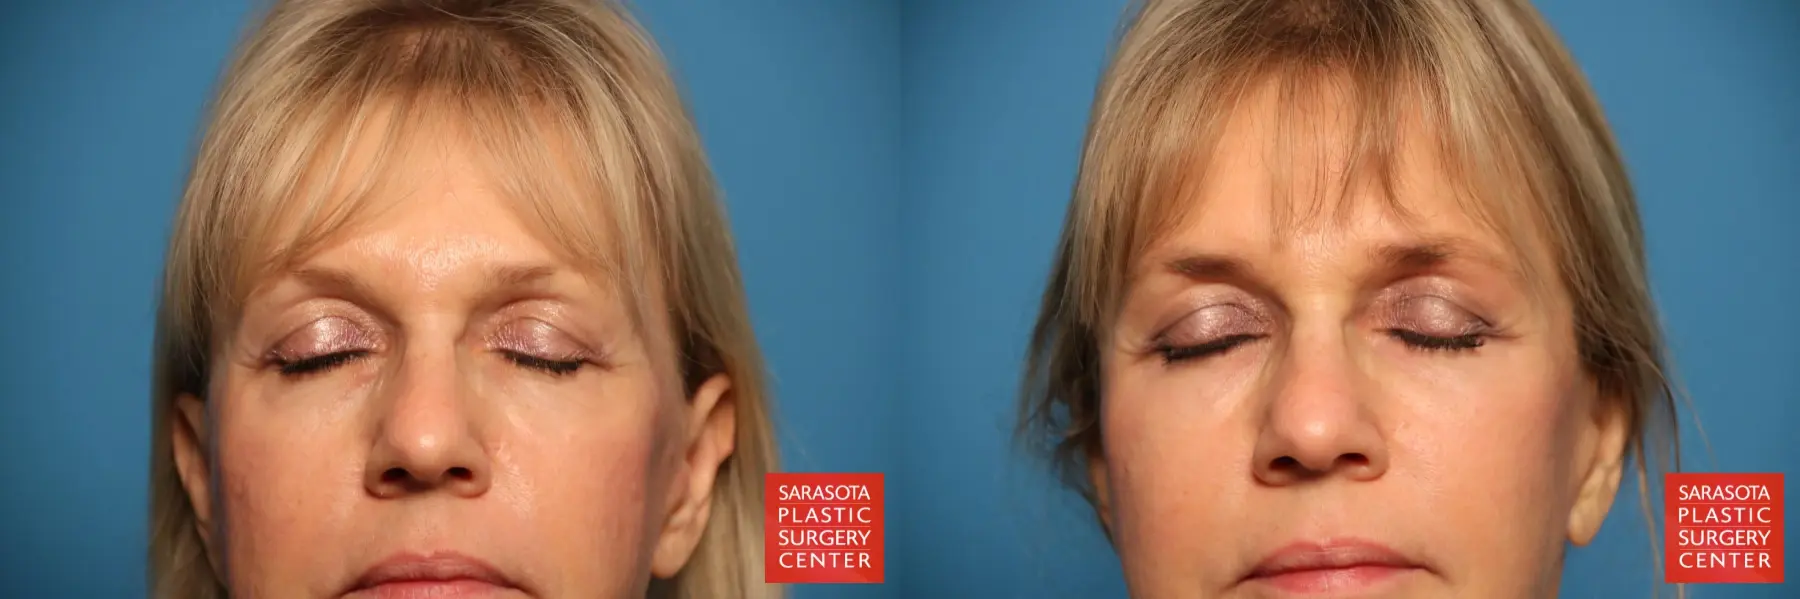 Eyelid Lift: Patient 7 - Before and After 2